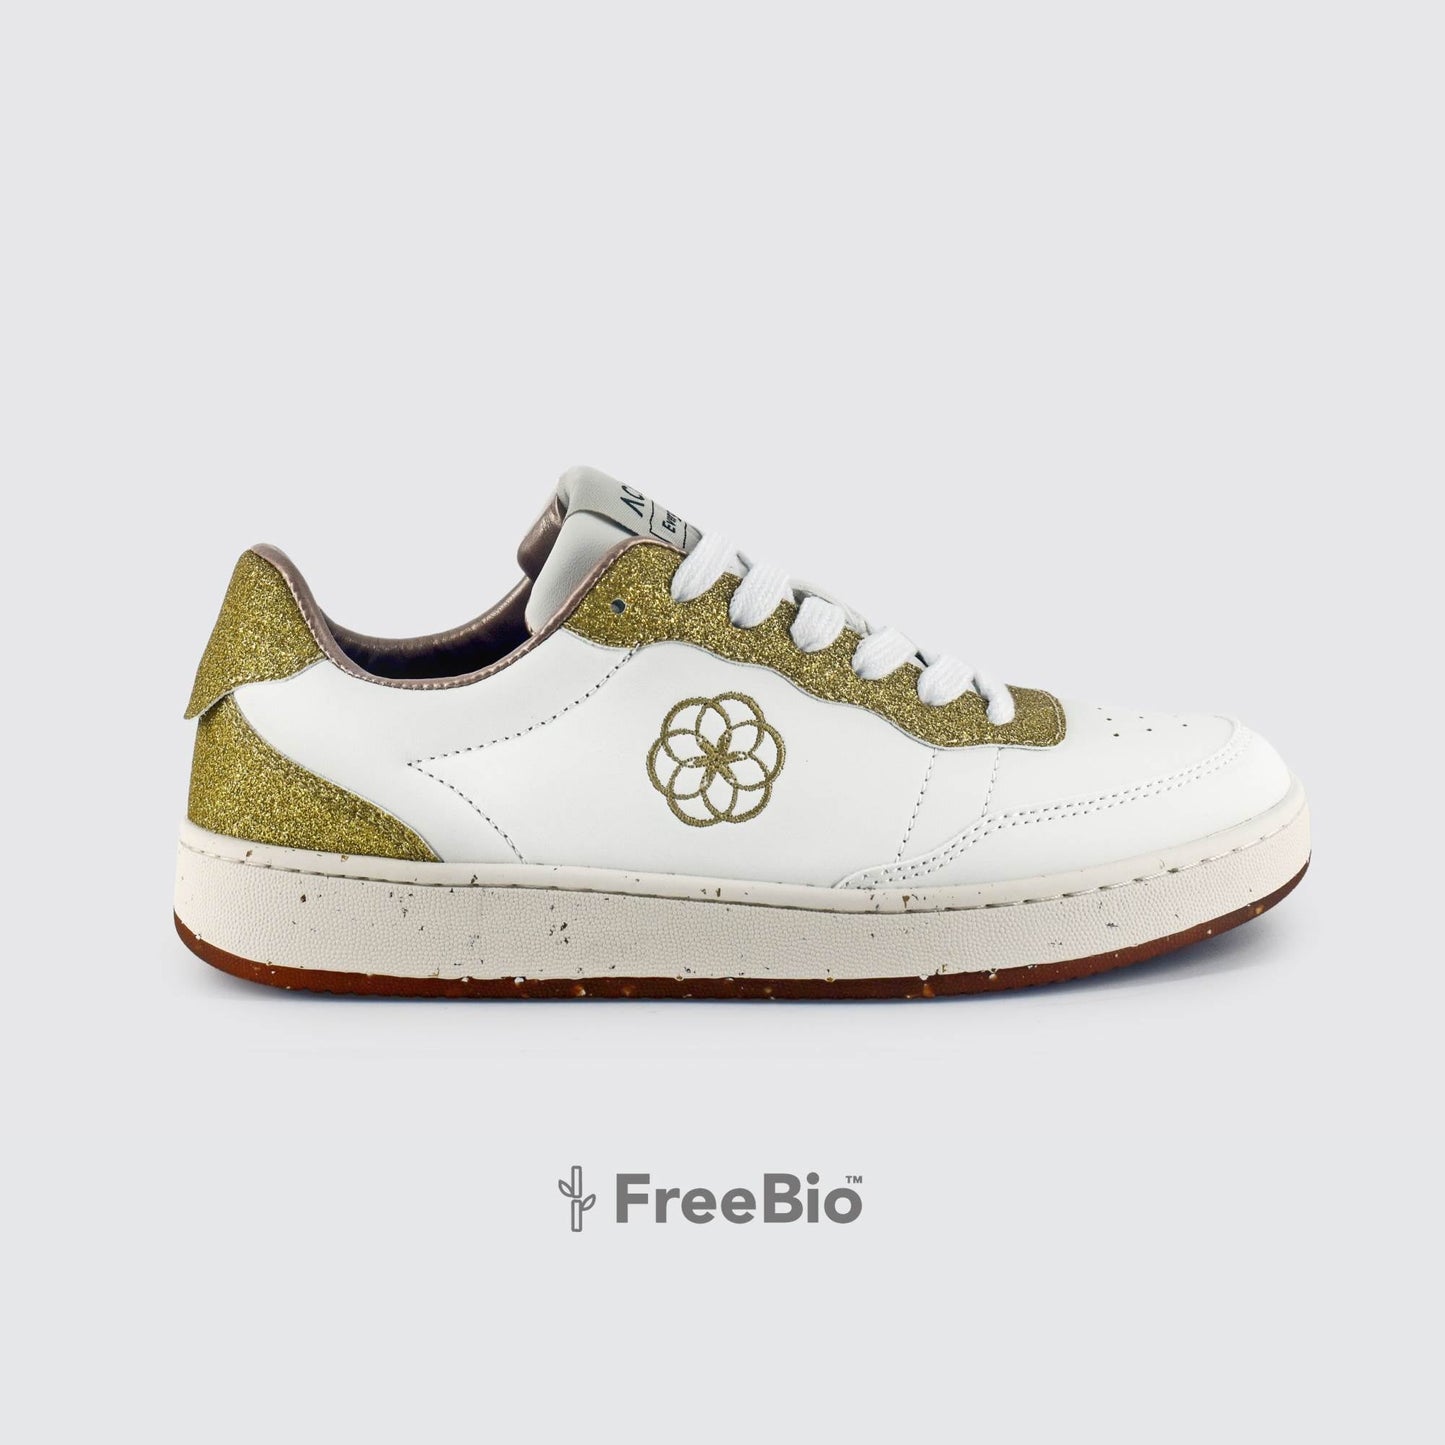 New - Evergreen Flower White Gold Shoes